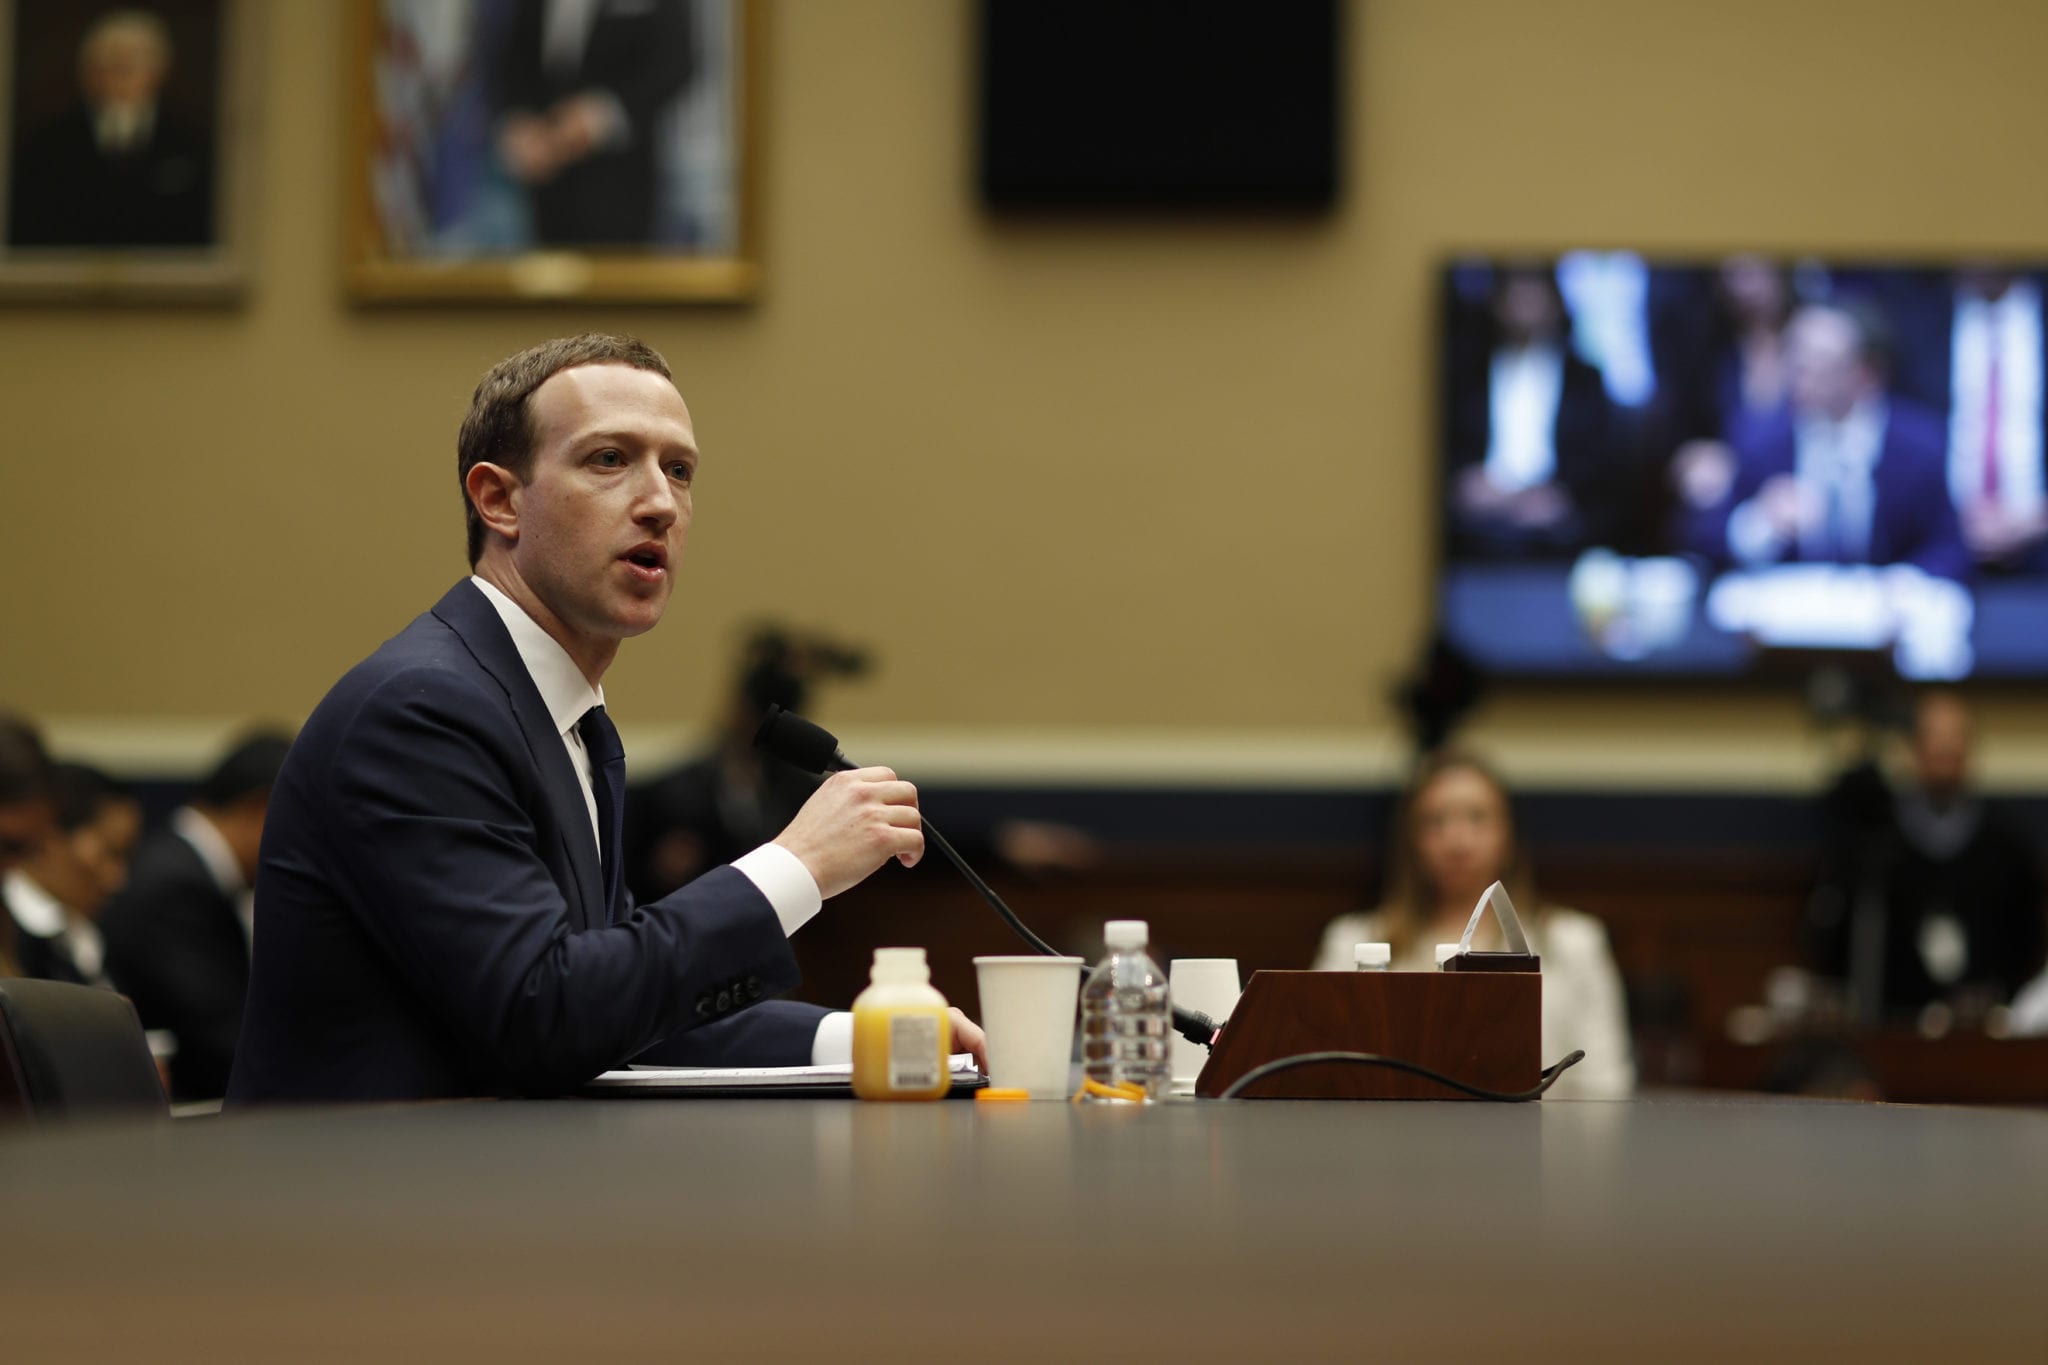 DC Attorney General Sues Mark Zuckerberg For Allowing Abuse Of Data To Help Trump In 2016